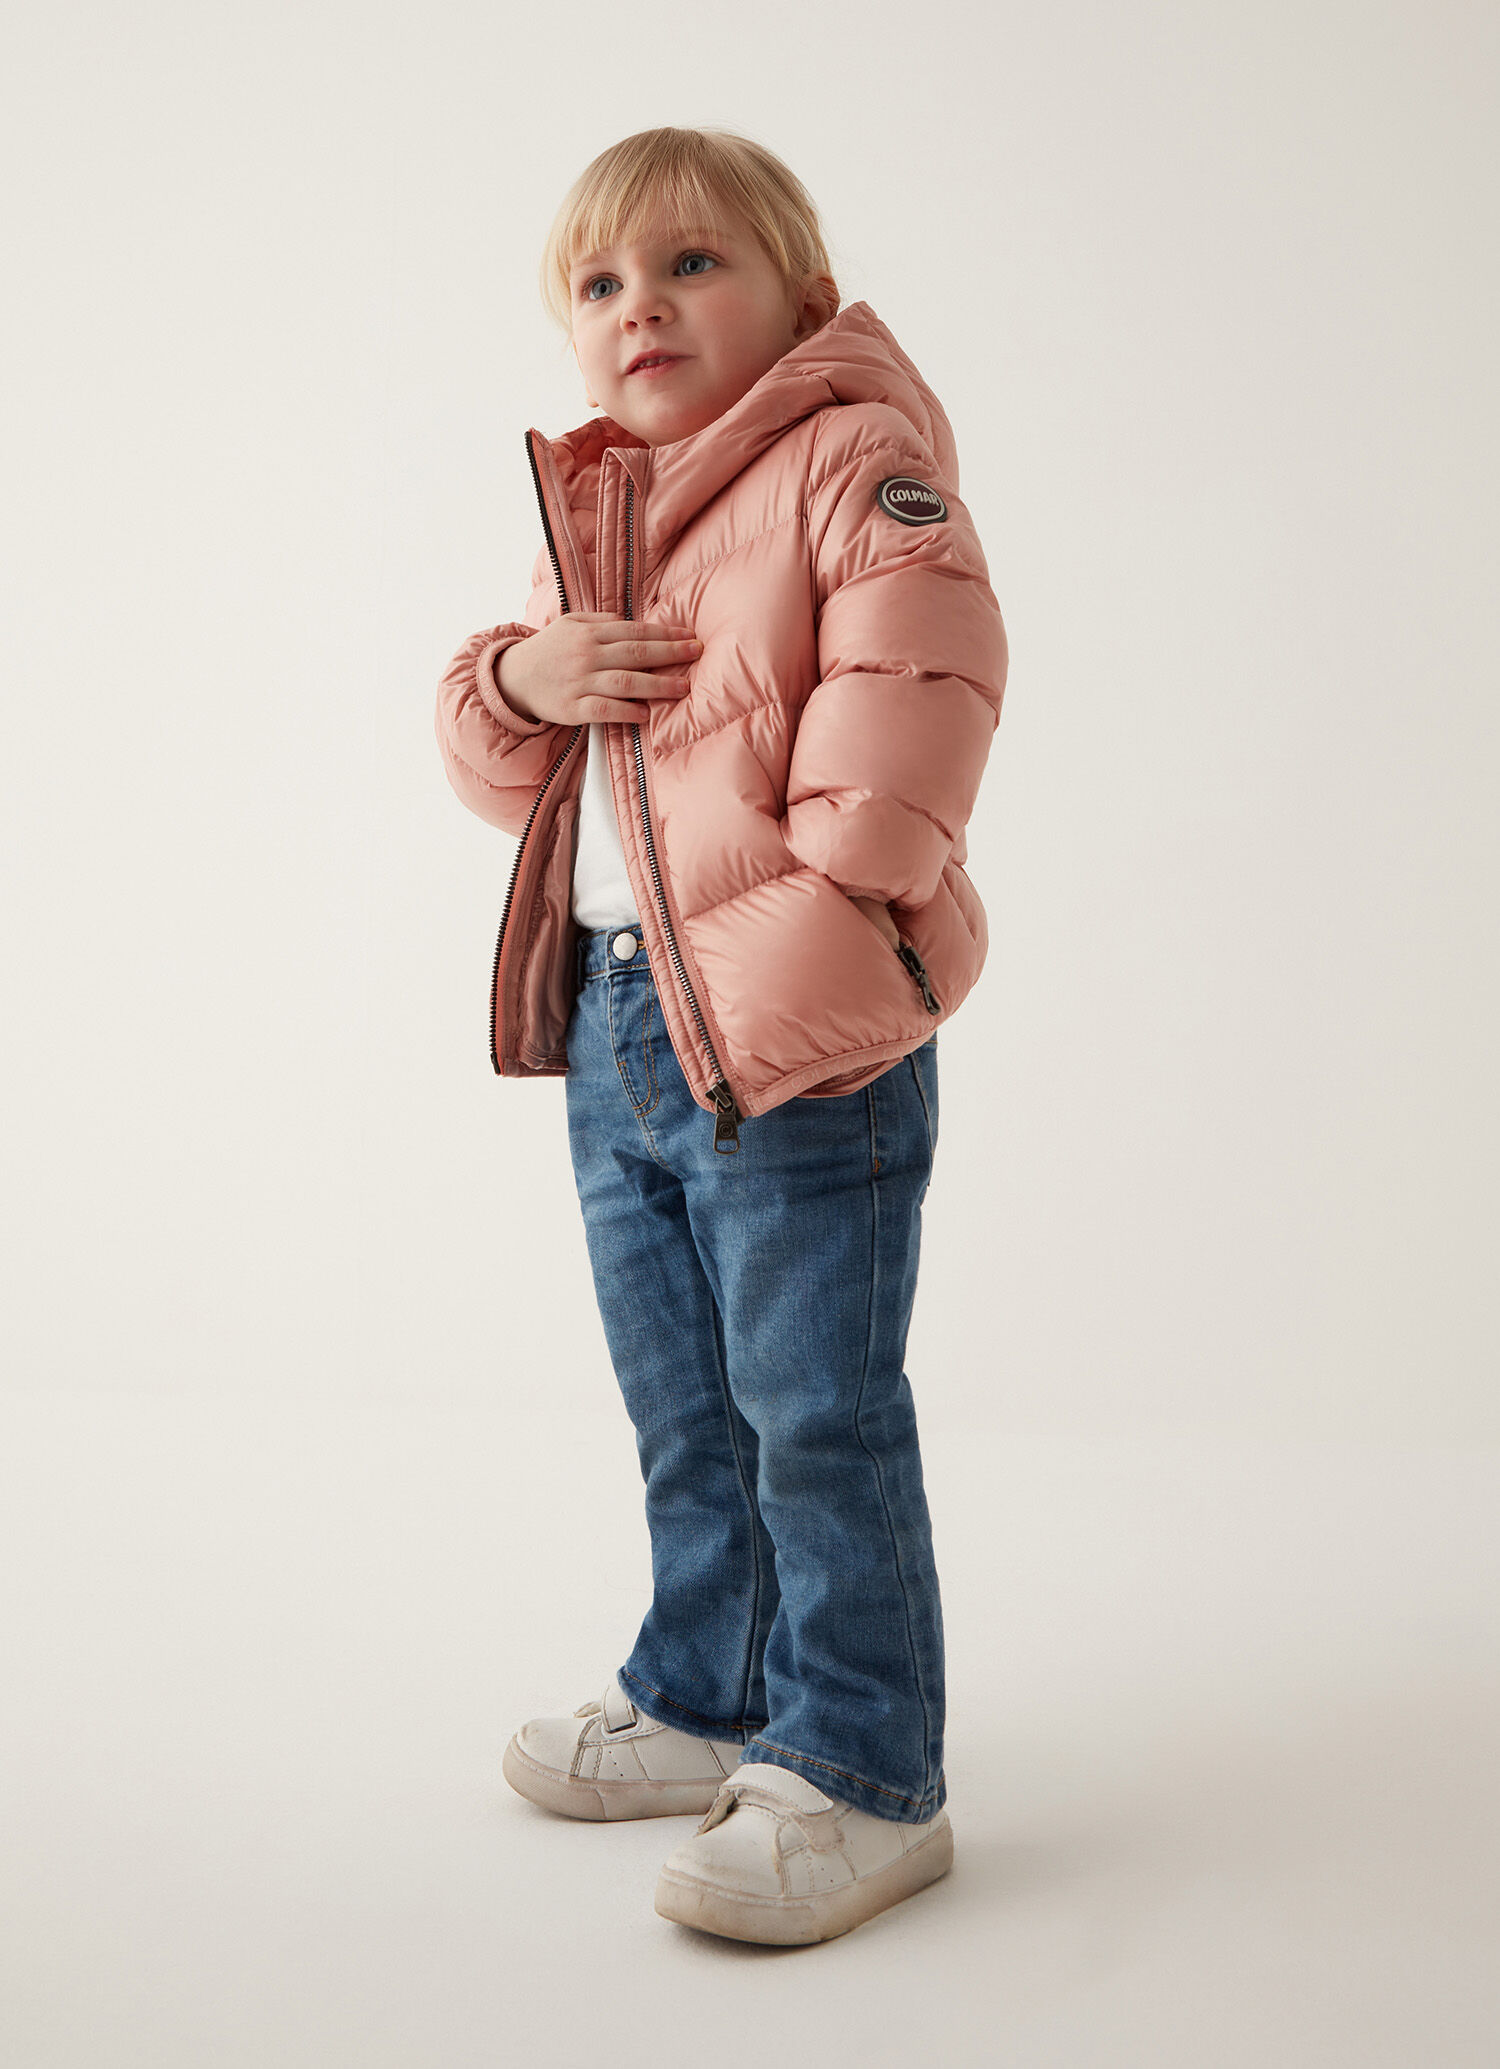 Children and babies' clothing 6-36 months - Babies' down jackets